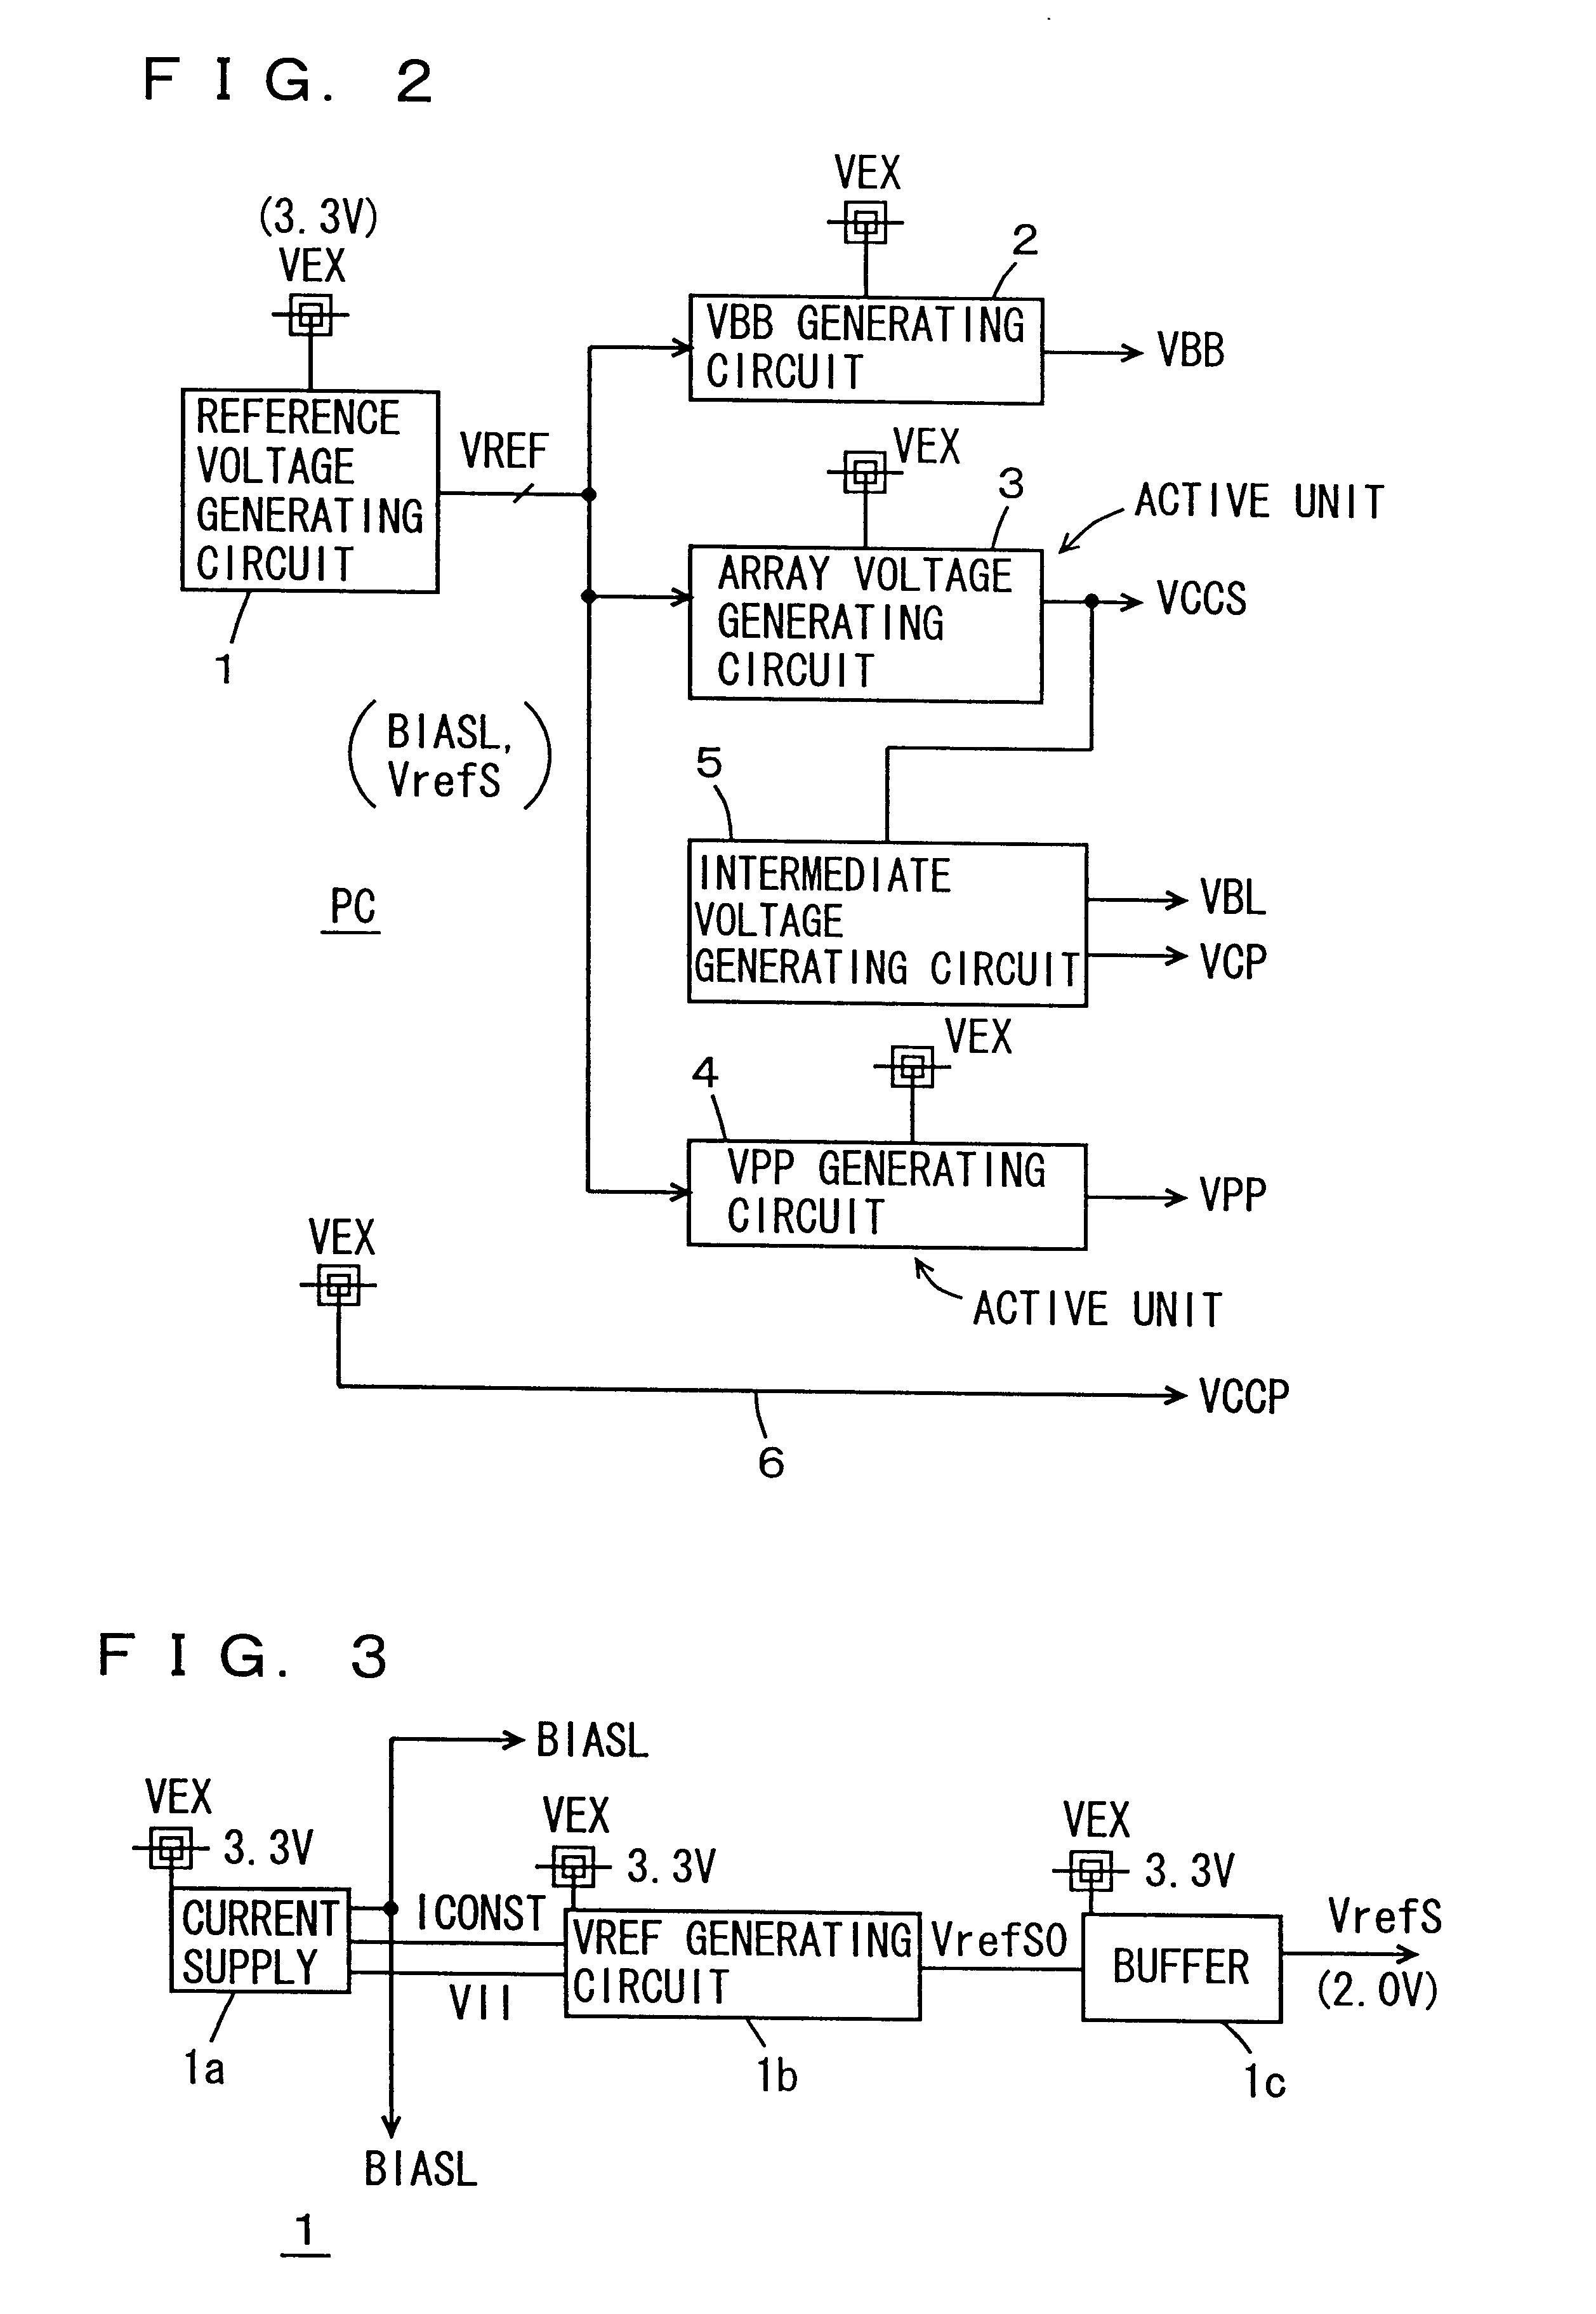 Semiconductor integrated circuit device having an internal voltage generating circuit layout easily adaptable to change in specification